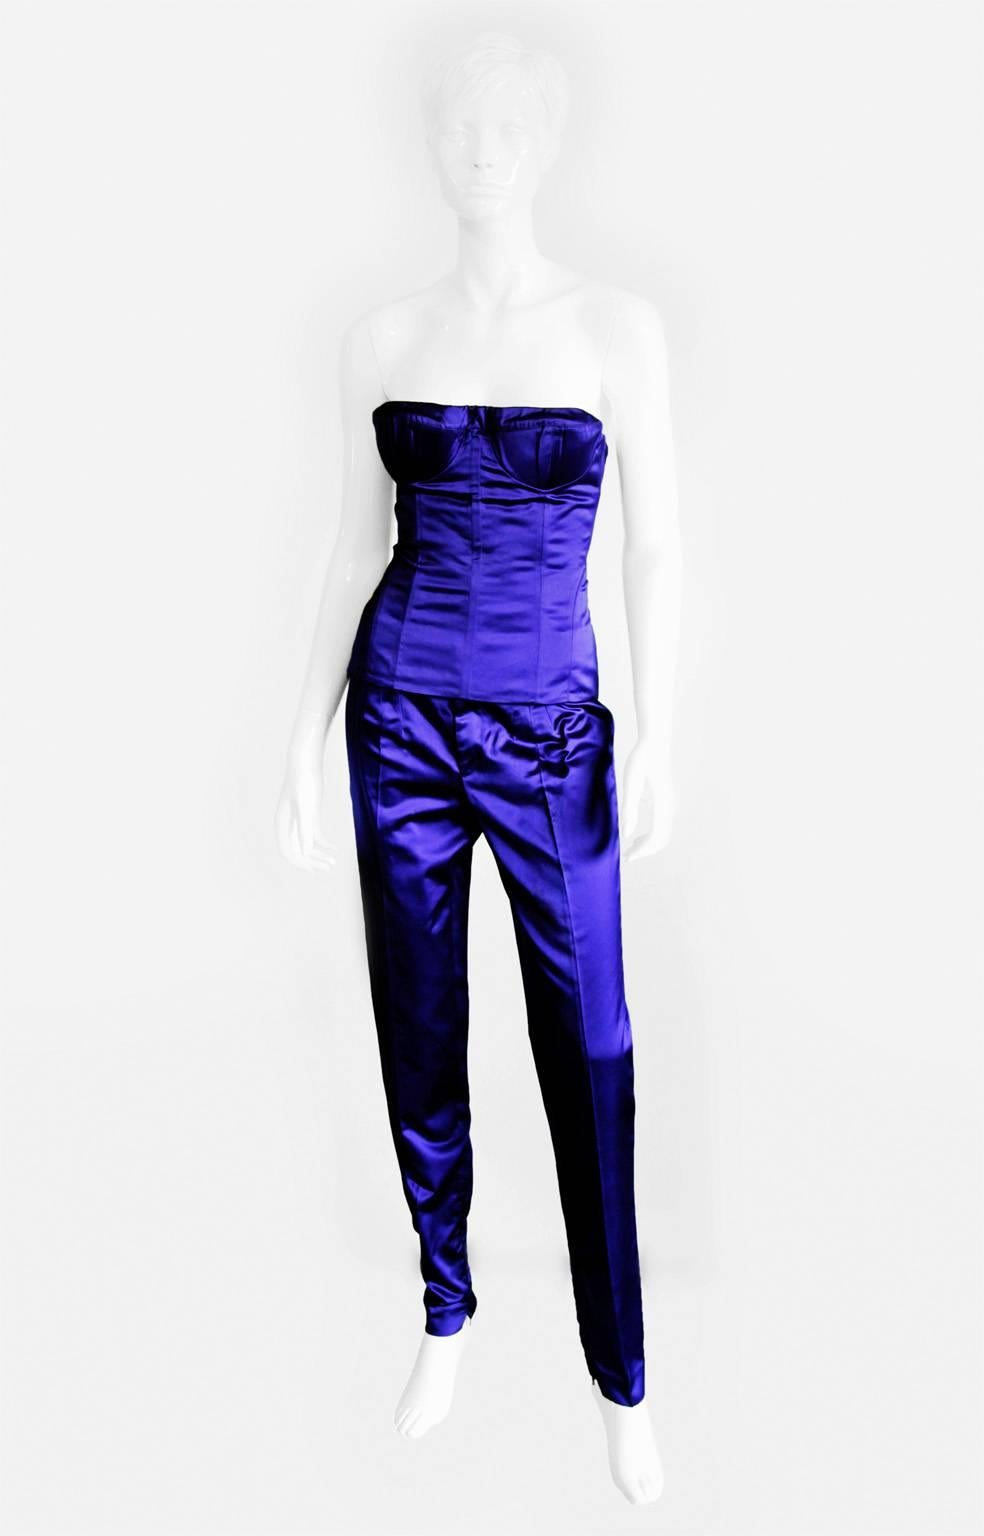 Women's Gorgeous Tom Ford Gucci SS 2001 Electric Blue Silk Runway Coat, Bustier & Pants!